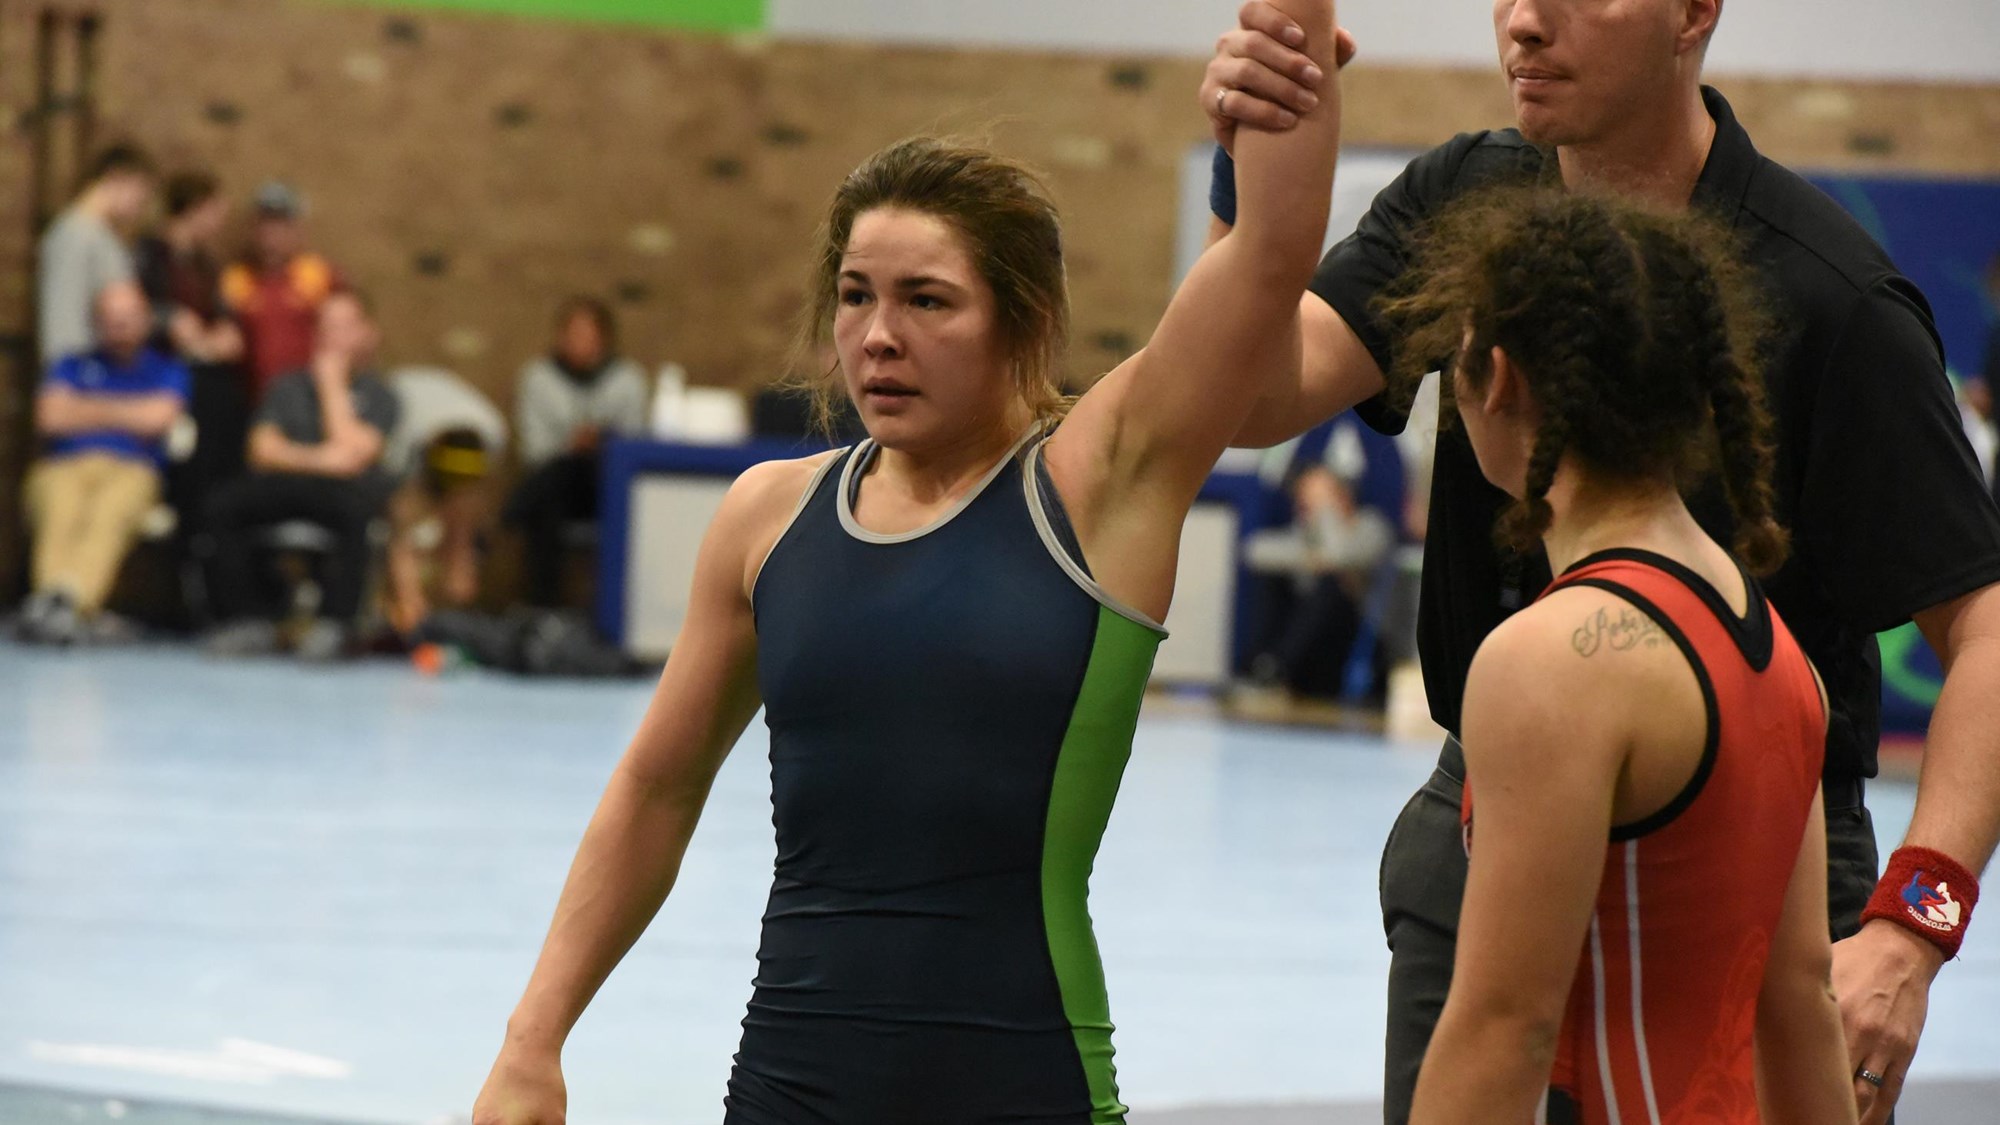 Dajan Treder (Inupiaq/Unangan) Top Finisher for the No. 12 University of Providence women’s wrestling team at WCWA Wrestling Championships